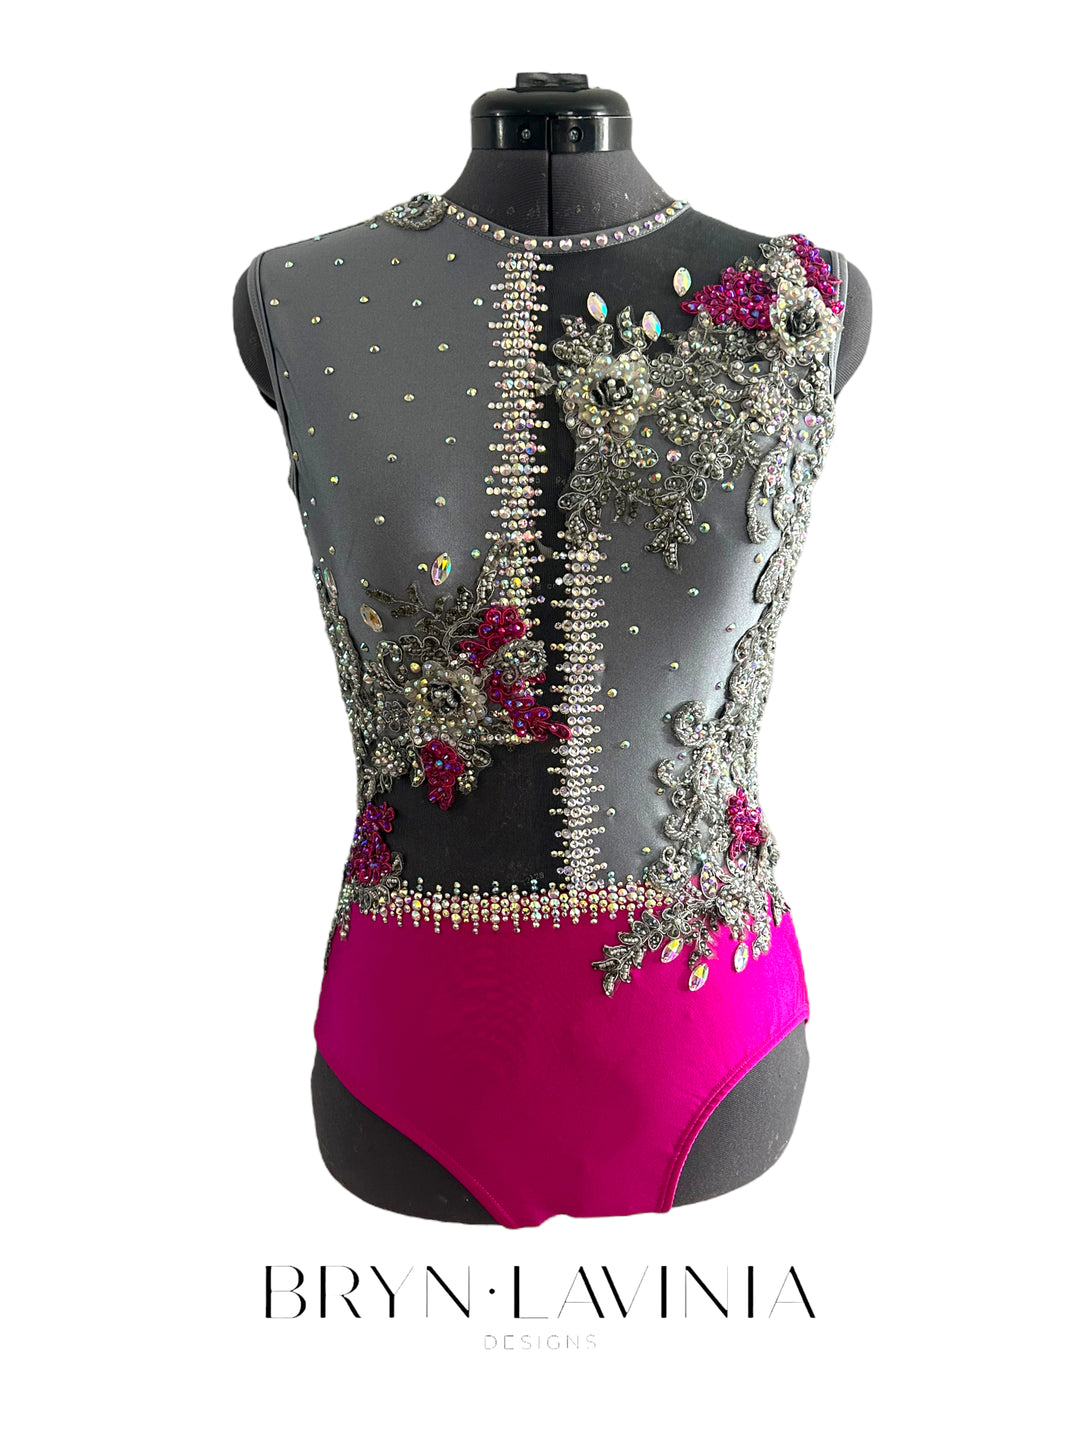 NEW AM Steel Grey/Magenta ready to ship costume